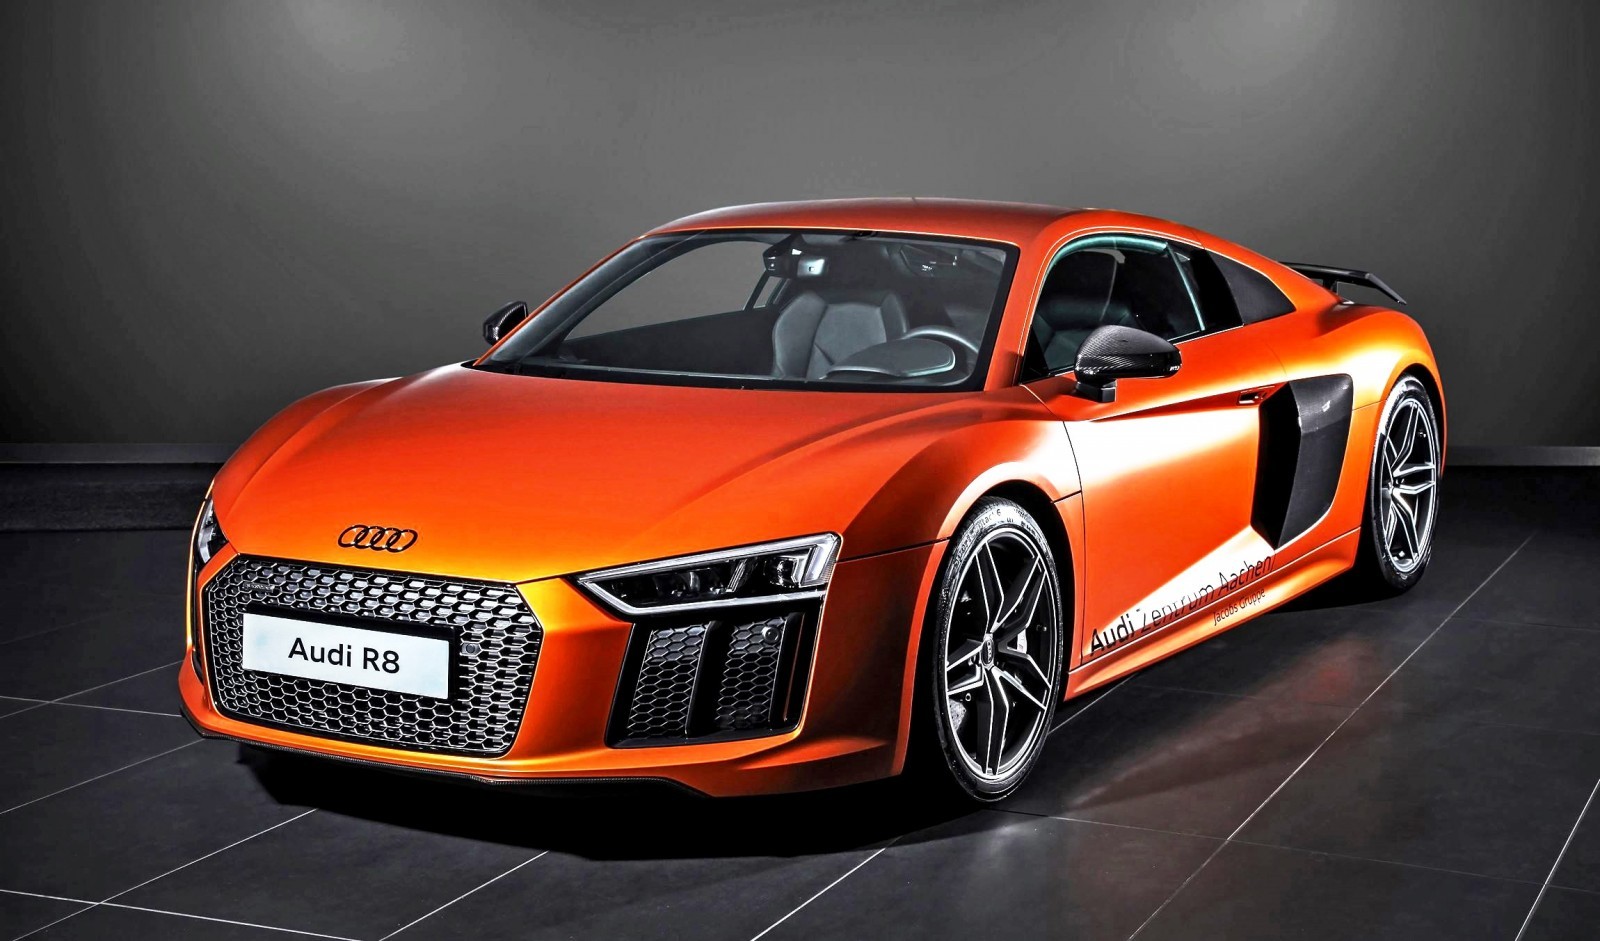 A Luxury Supercar Defined: The 2016 Audi R8 V10